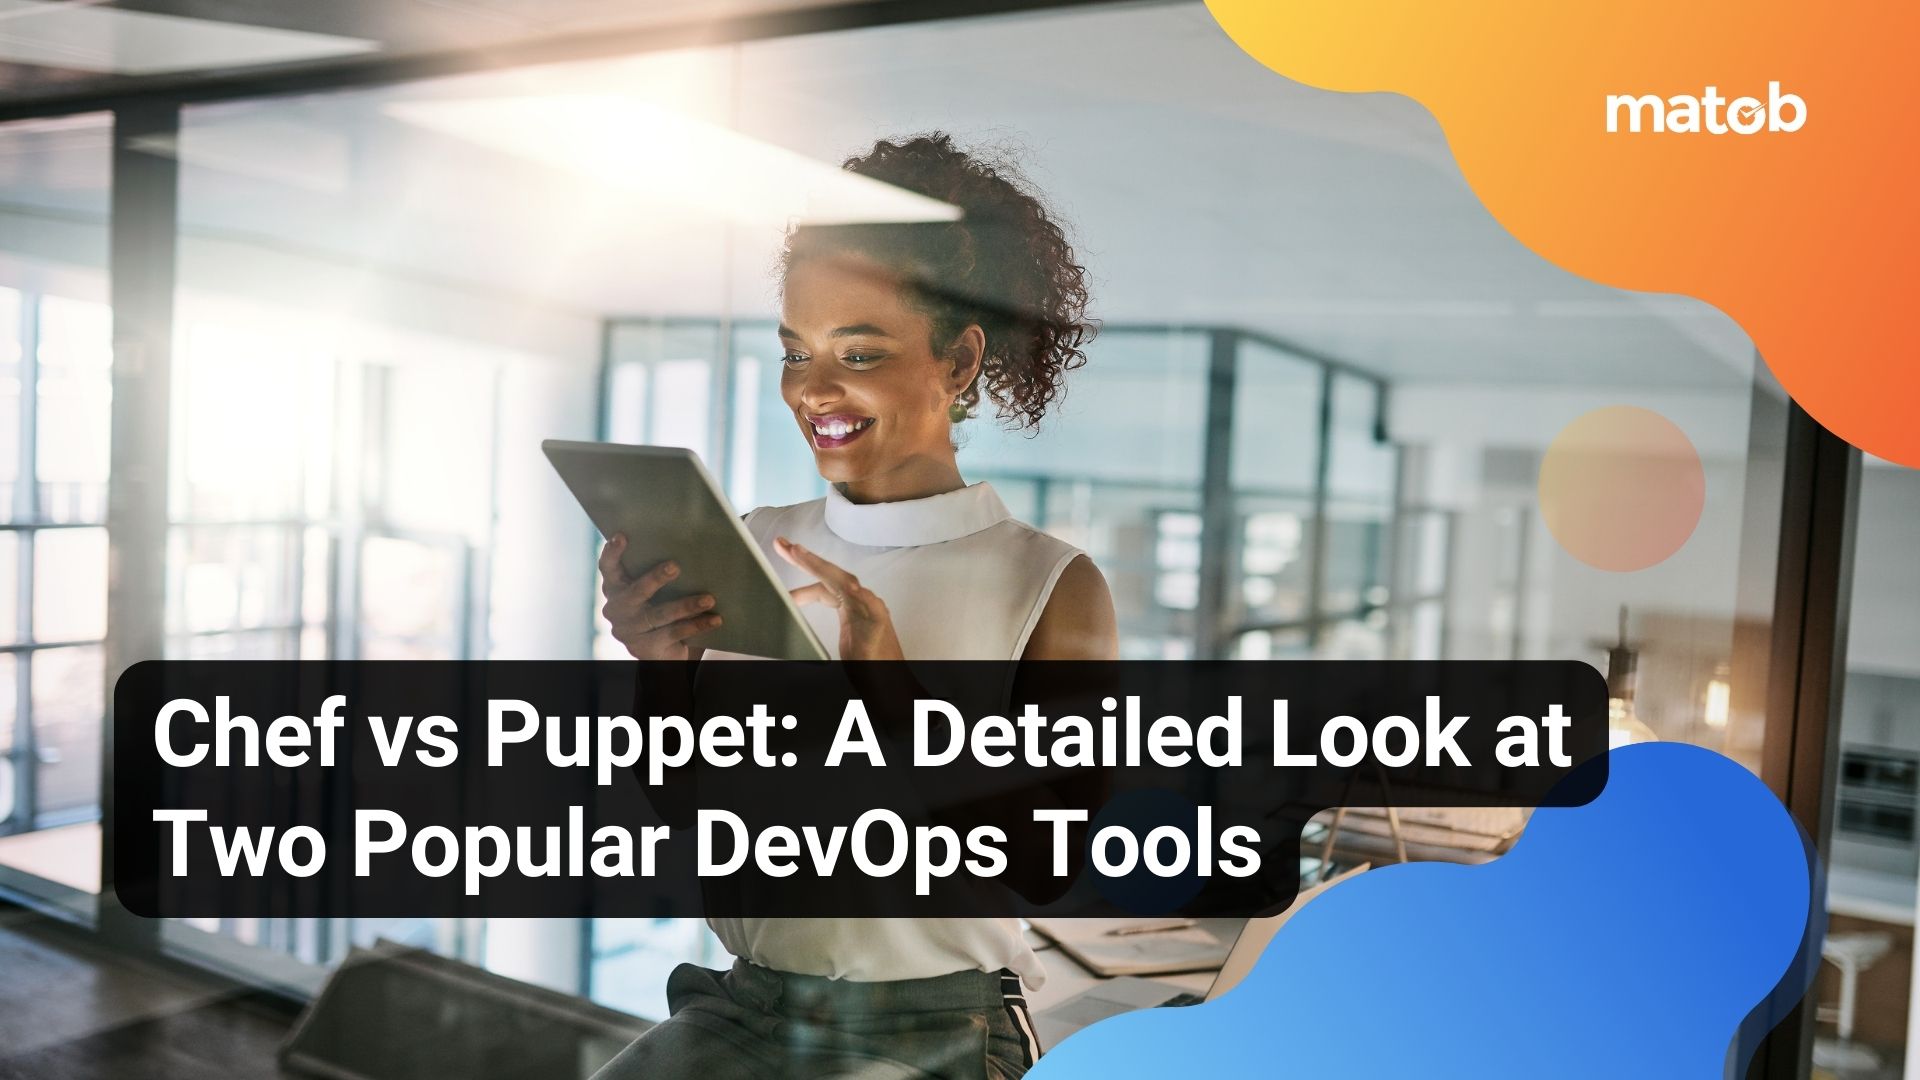 Chef vs Puppet: A Detailed Look at Two Popular DevOps Tools